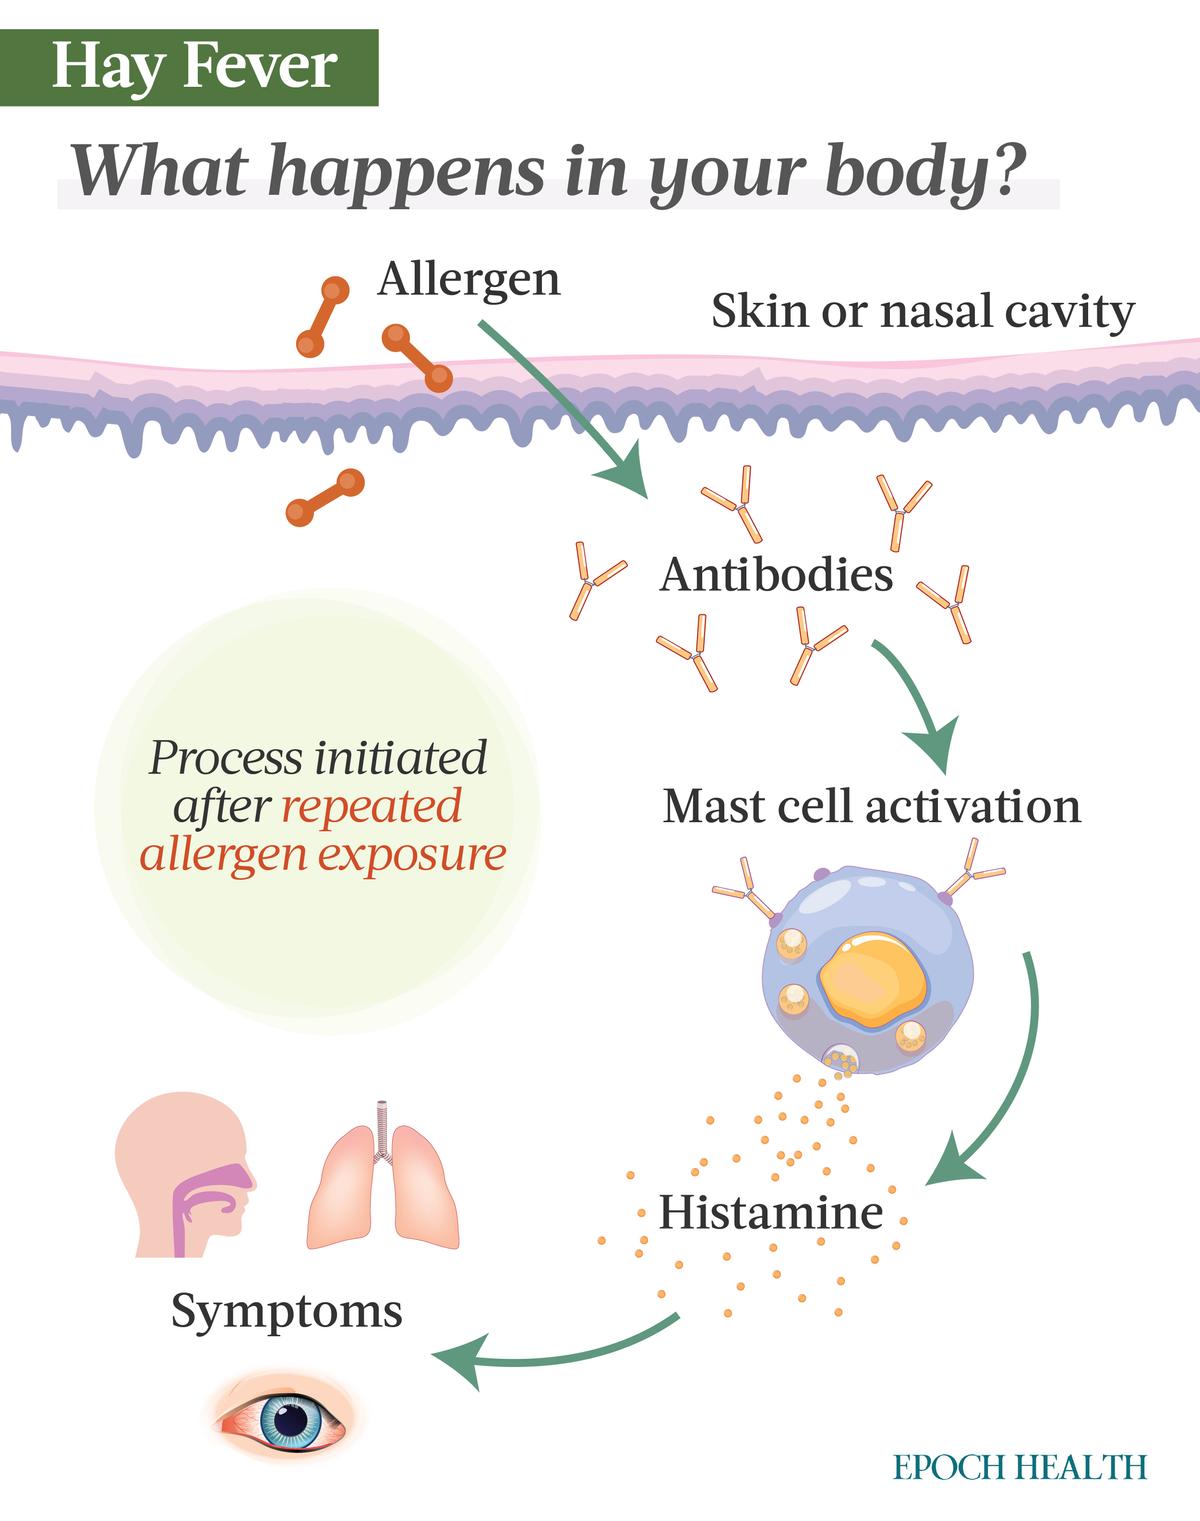  Upon repeated exposure to an allergen, the immune system produces antibodies called immunoglobulin E (IgE), which activate mast cells (white blood cells) that release histamines to ward off the allergen. This process results in hay fever symptoms. (Illustrations from Shutterstock/Designed by The Epoch Times)